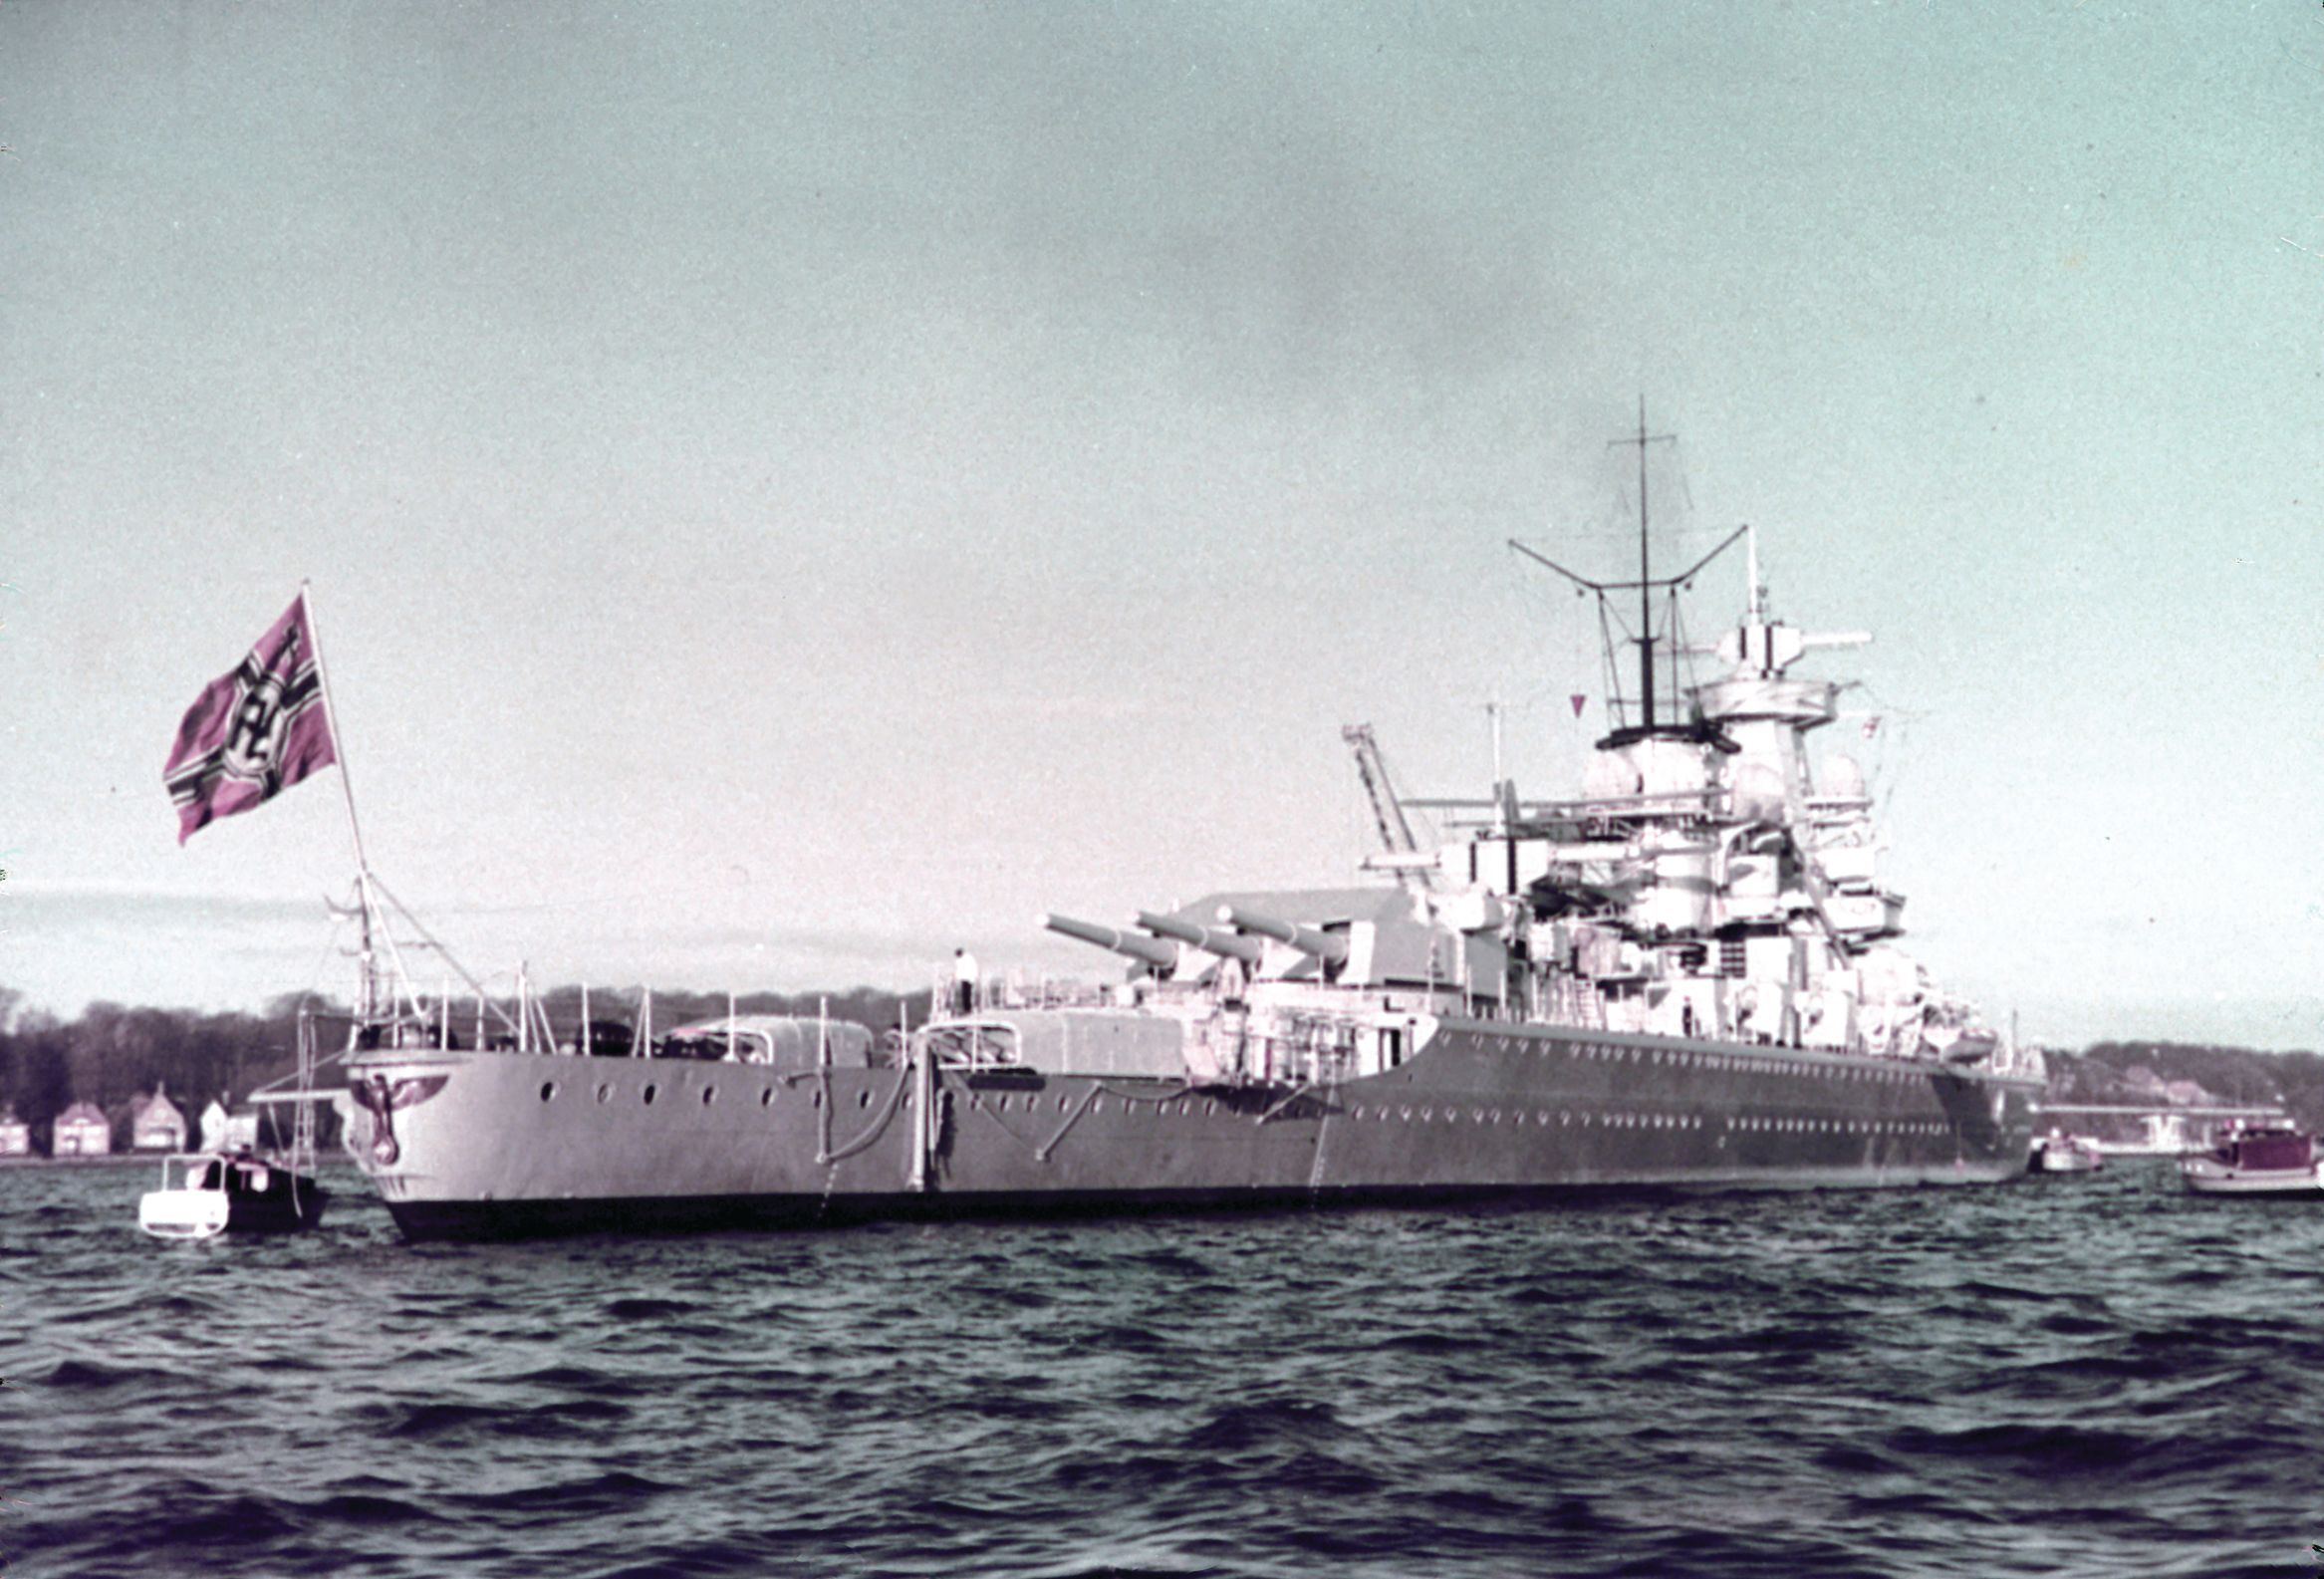 The pocket battleship Admiral Scheer is photographed at anchor in 1938. The warship was built for speed and with heavy armament, its main battery including 11-inch guns. Admiral Scheer’s attack on Convoy HGX84 was disappointing as most of the merchant ships escaped due to the vigorous defense of its escorts.